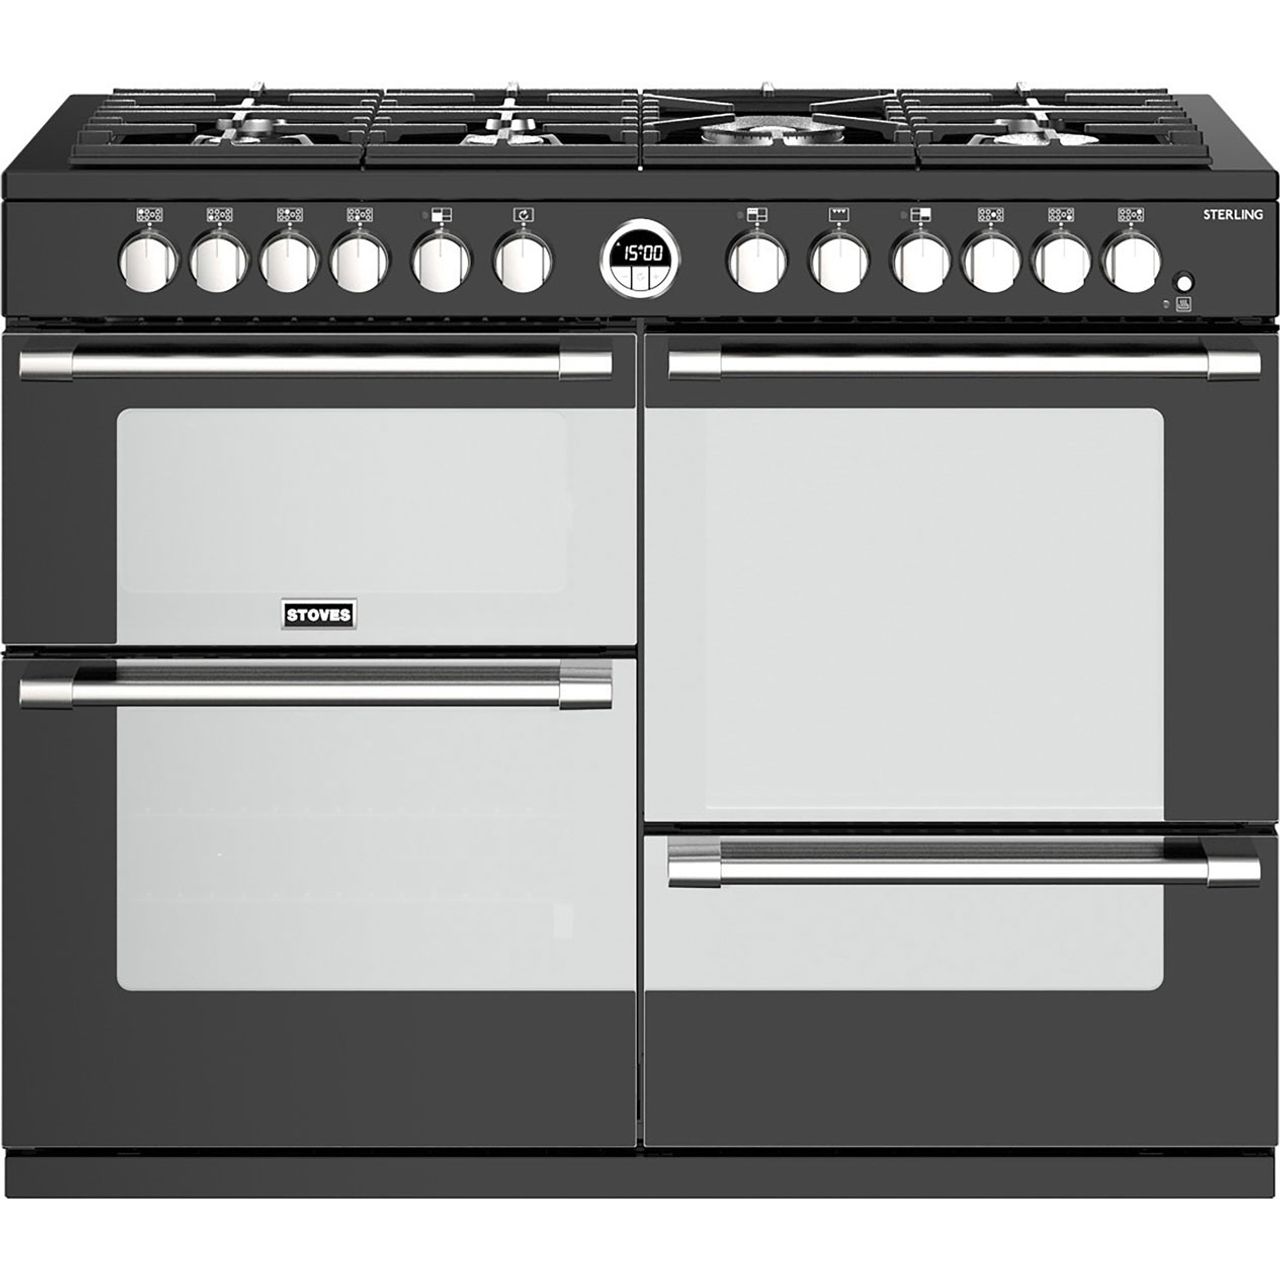 Stoves Sterling S1100DF 110cm Dual Fuel Range Cooker Review